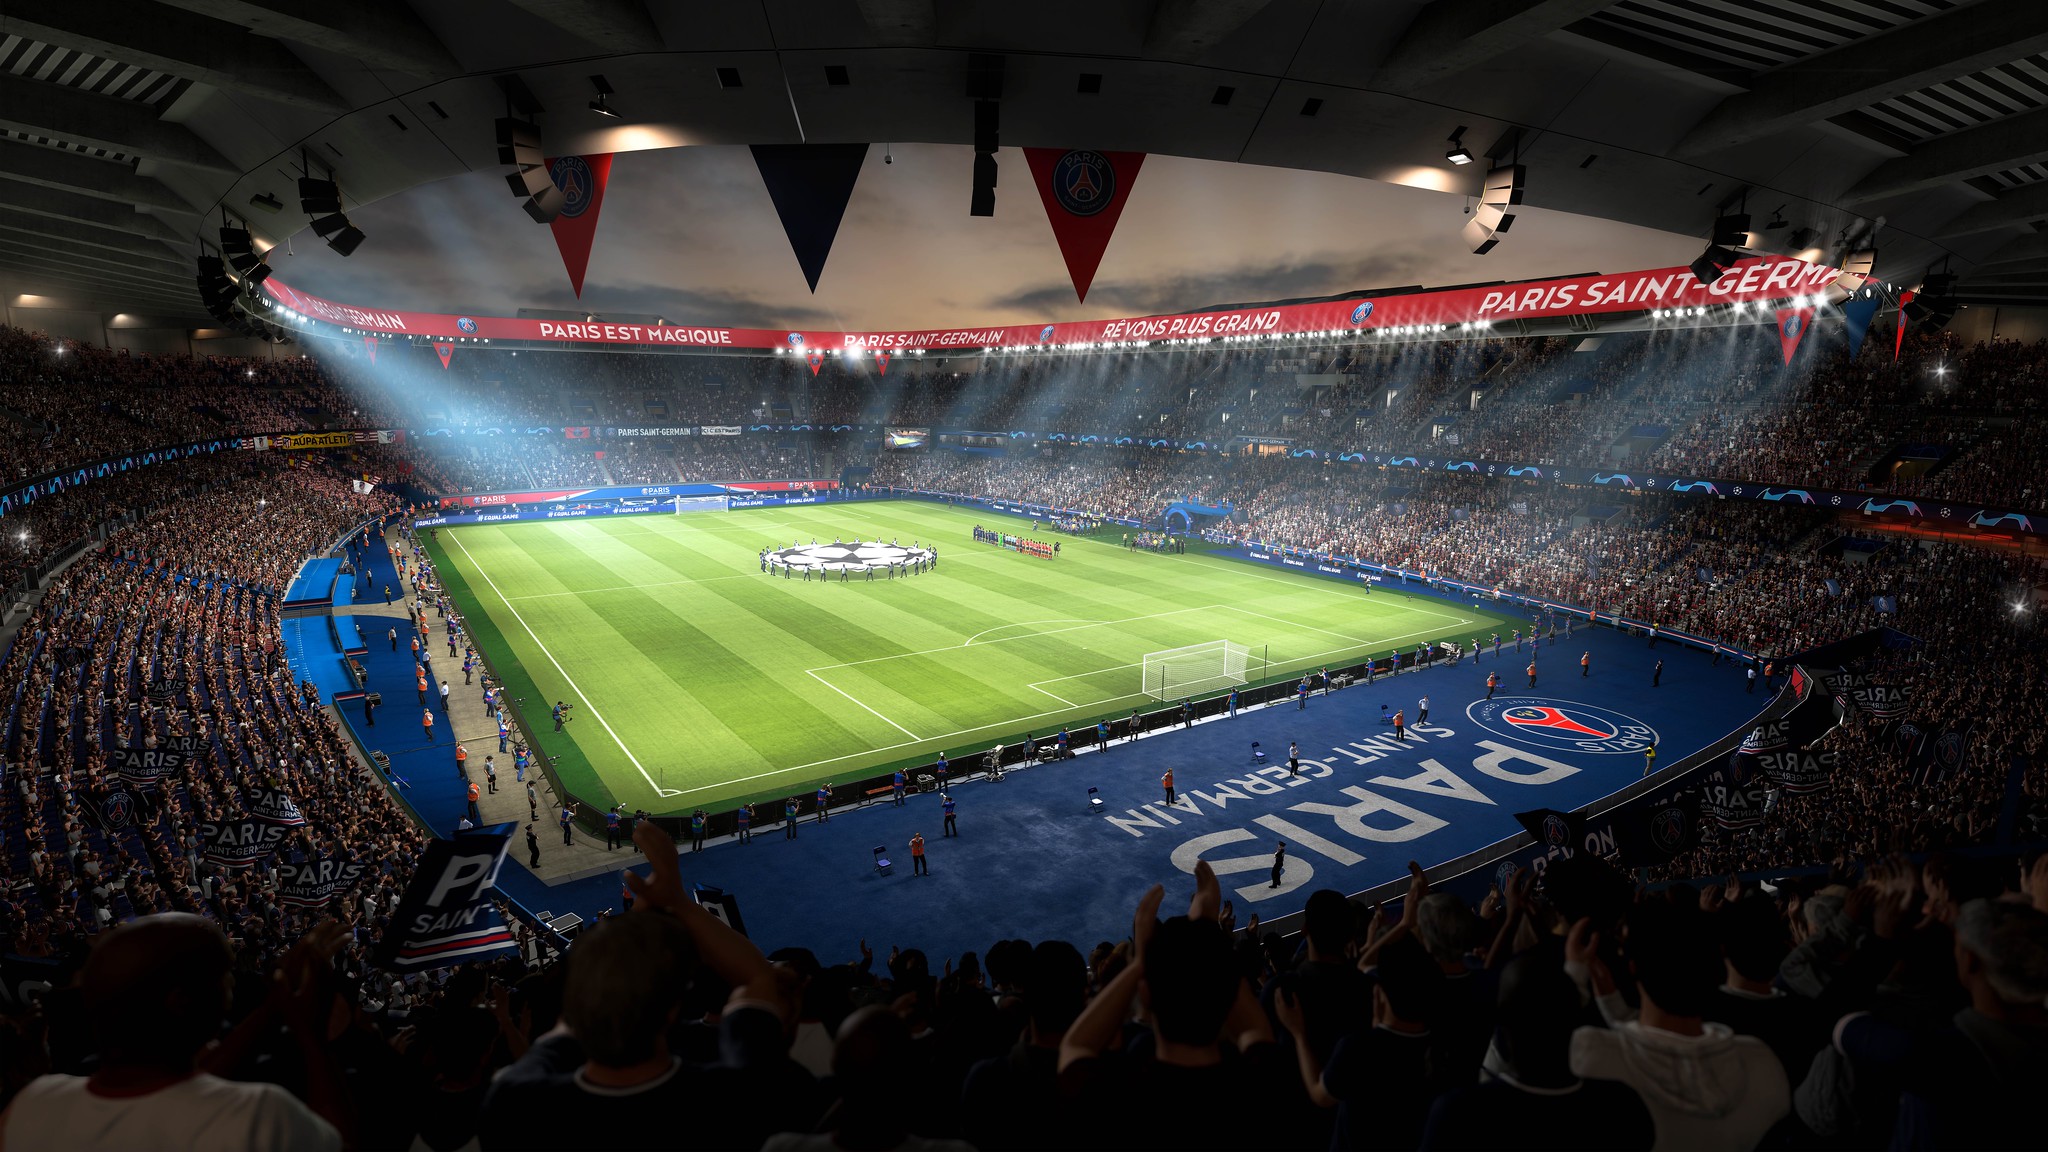 Next Generation FIFA 21 On Xbox Series And PS5 Might Look Pretty, But Is The Gameplay Going To Be Any Different?